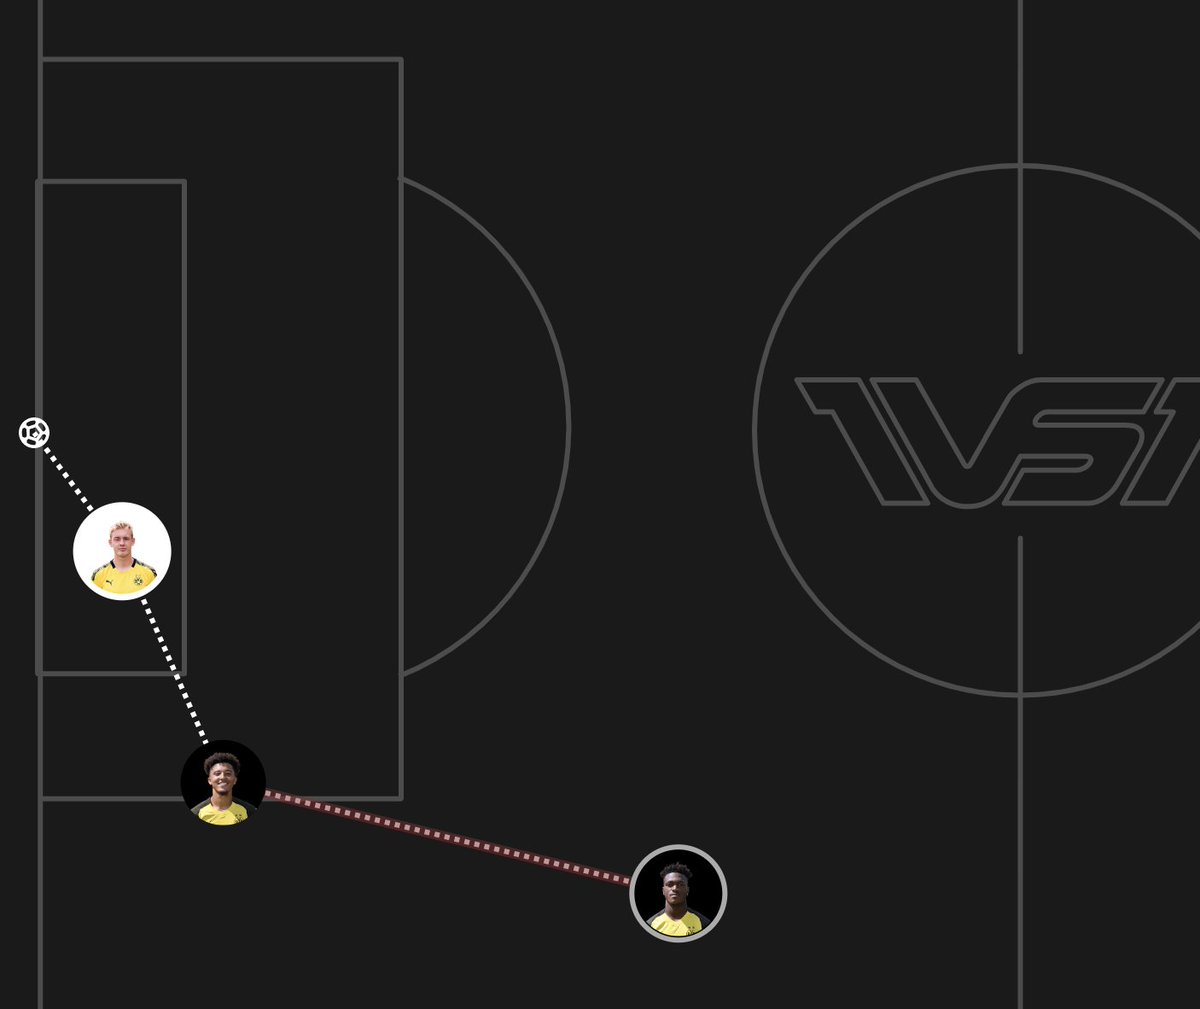 You can see the types of crosses into the box which Jadon favors, which is flat and lofted crosses from that same position. These high-level crosses are perfect for the likes of Martial and Rashford. Via ( @utdarena)